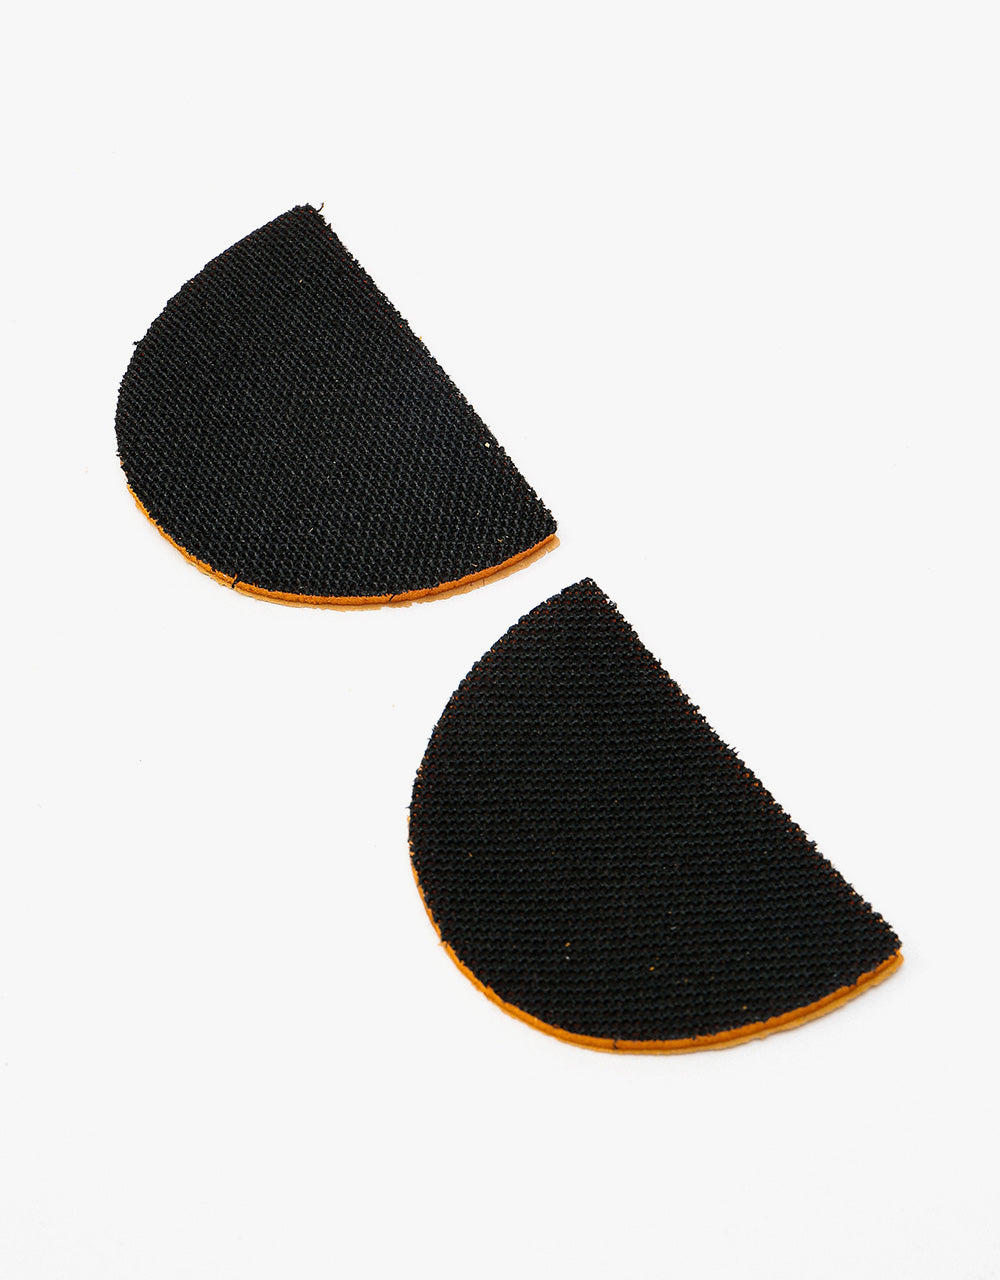 Footprint Early Worm Gamechangers 5mm Insoles